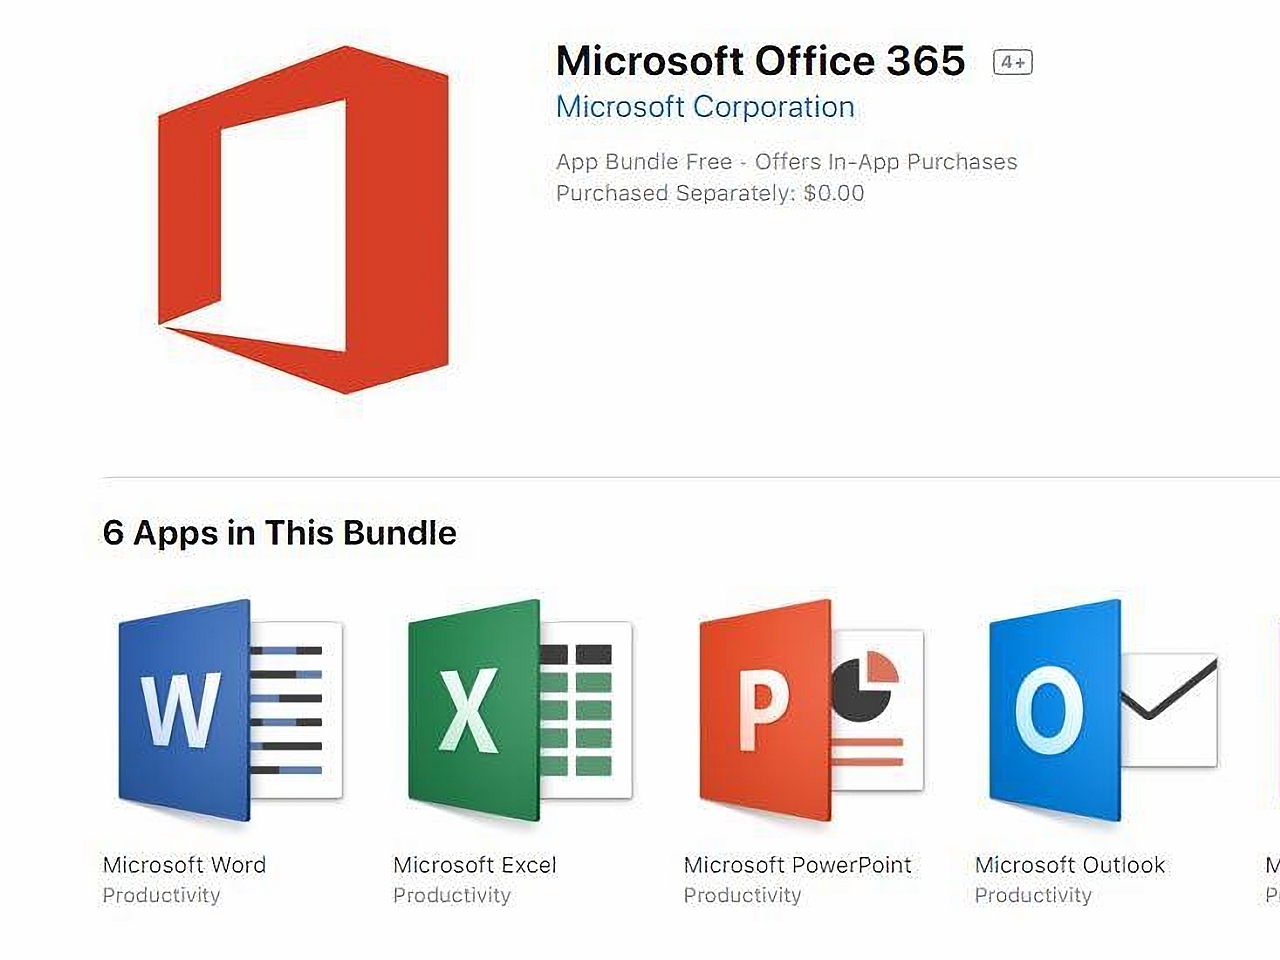 office 365 for mac update